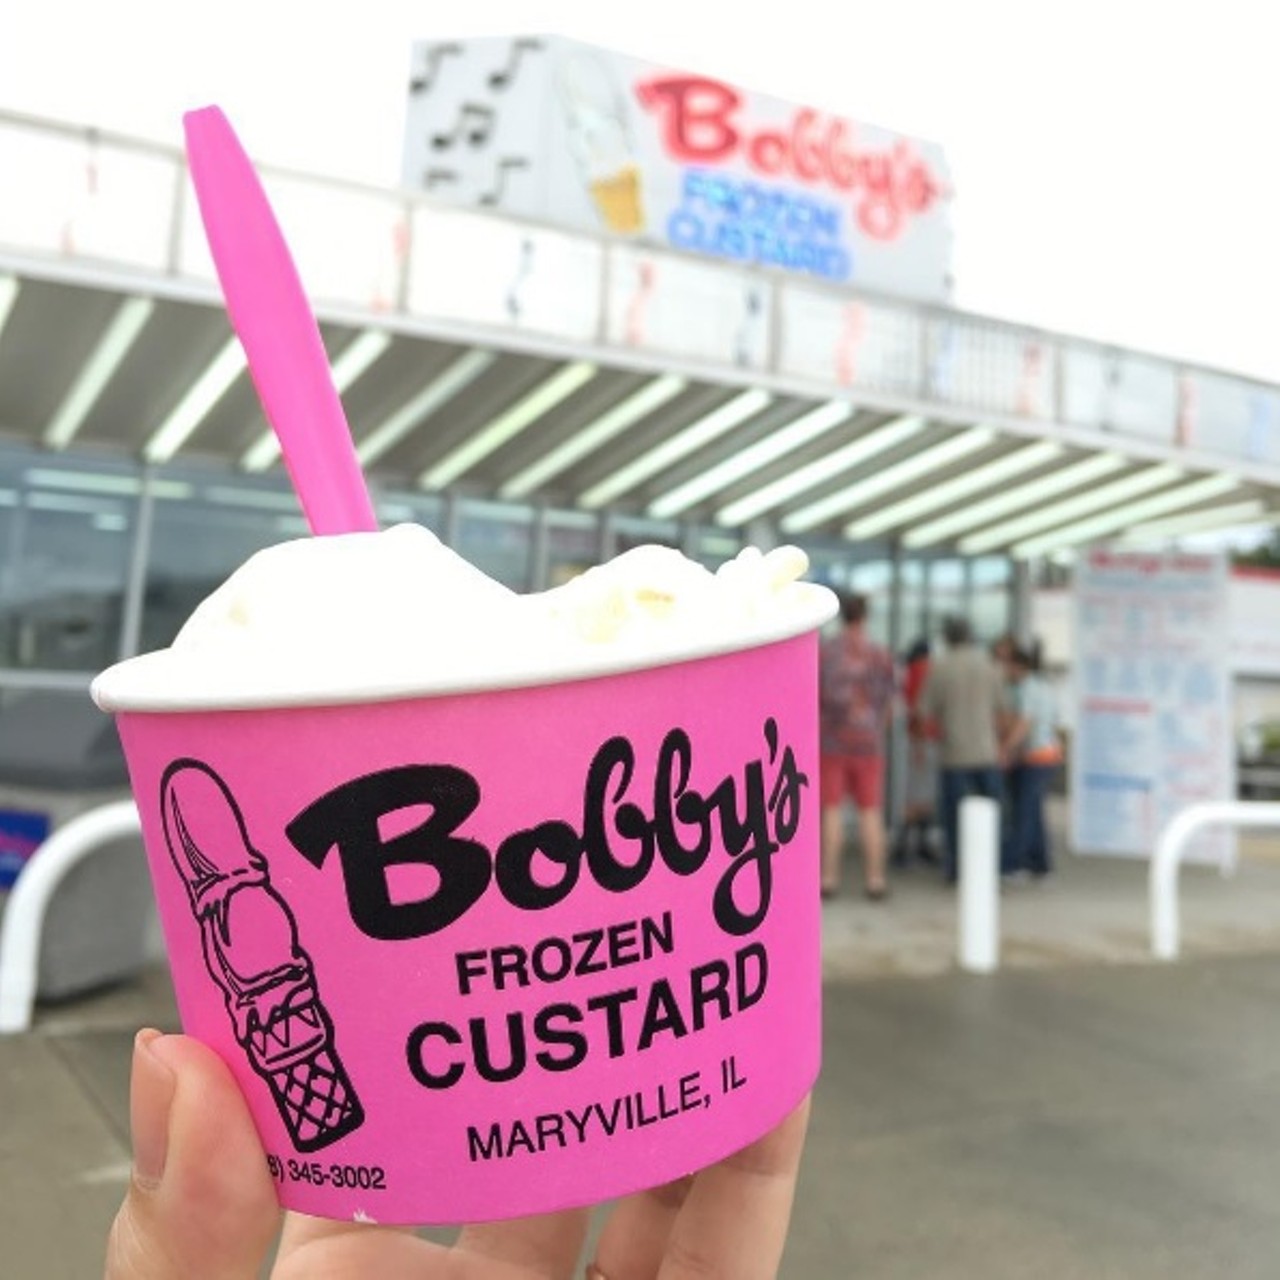 Maryville/Collinsville/Granite City
Bobby's Frozen Custard
2525 N Center St.
Maryville, IL 62062
This '50s-style custard stand draws fans from near and far -- which is especially obvious from the long lines that form at every window on the opening and closing days of the year. But even arriving at peak time shouldn't turn you away from this deliciousness; the staff is notoriously quick, often delivering your cone as soon as you get your change. In addition to serving amazing custard, caramel apples and chocolate-covered strawberries, Bobby's also hosts concerts on weekend summer nights. You'll walk away full and happy -- and quite possibly with a new favorite frozen custard destination. Photo courtesy of Instagram / bobbimclin.